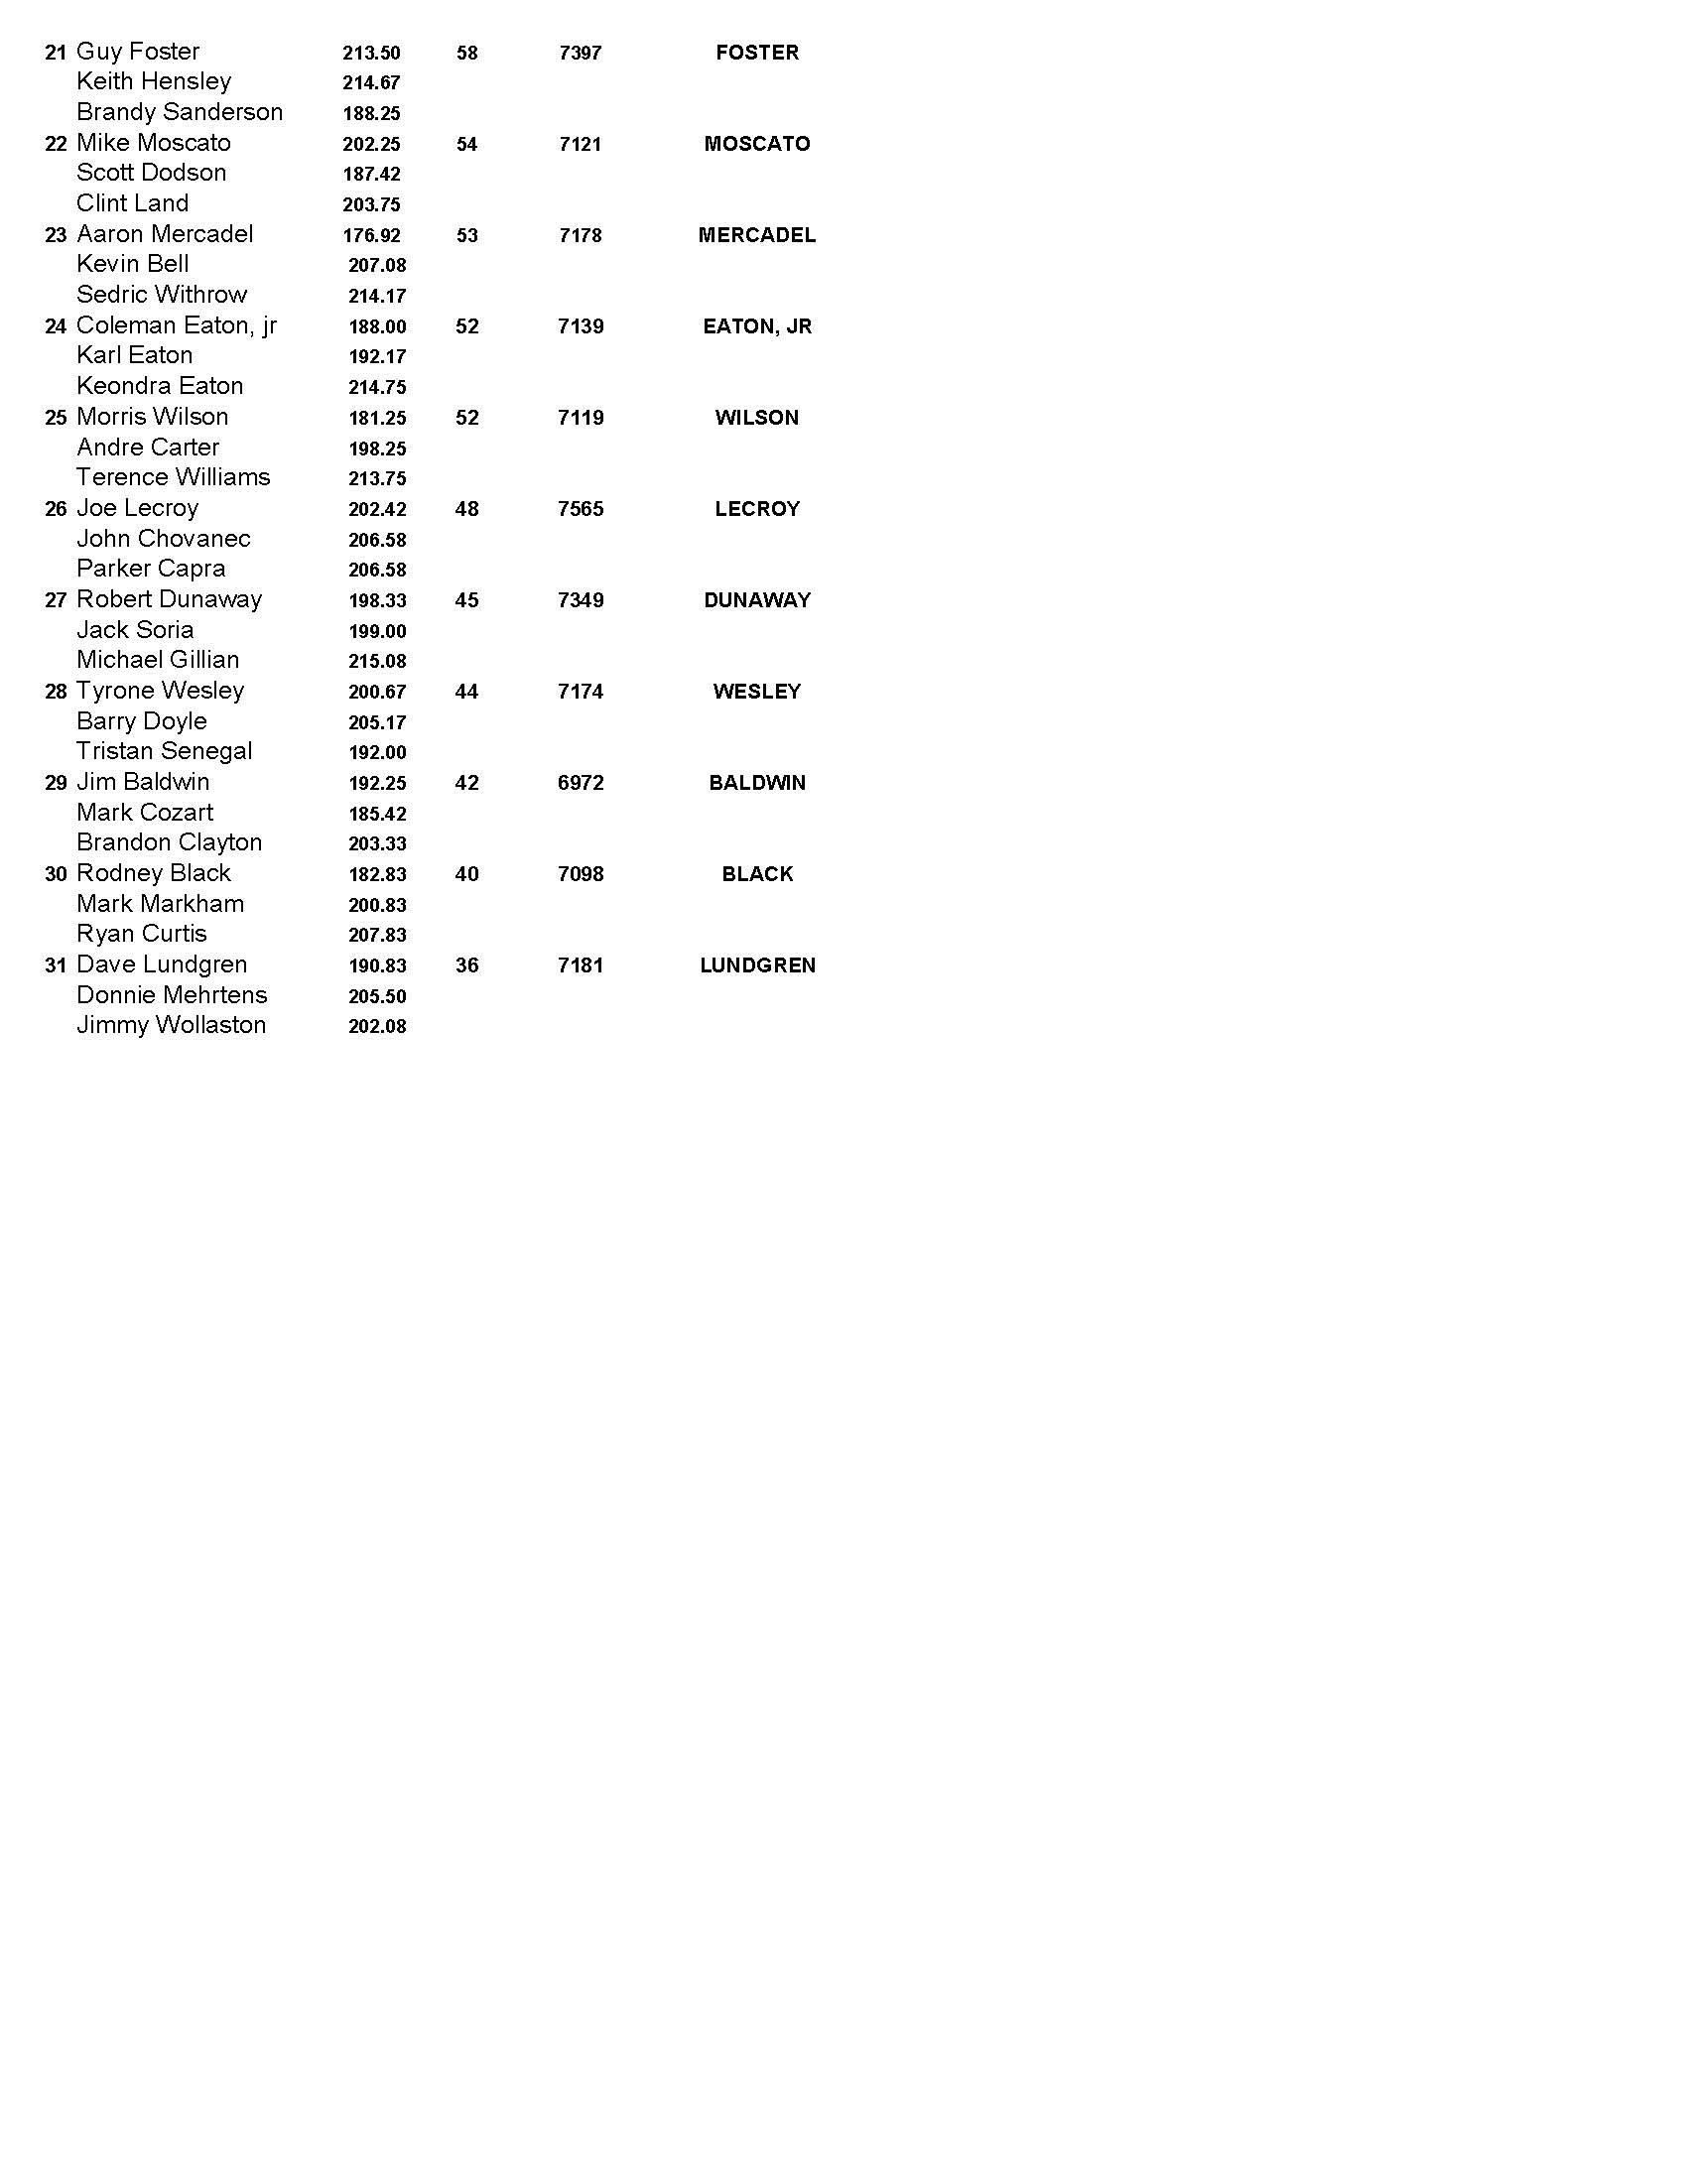 08082021results_Page_2